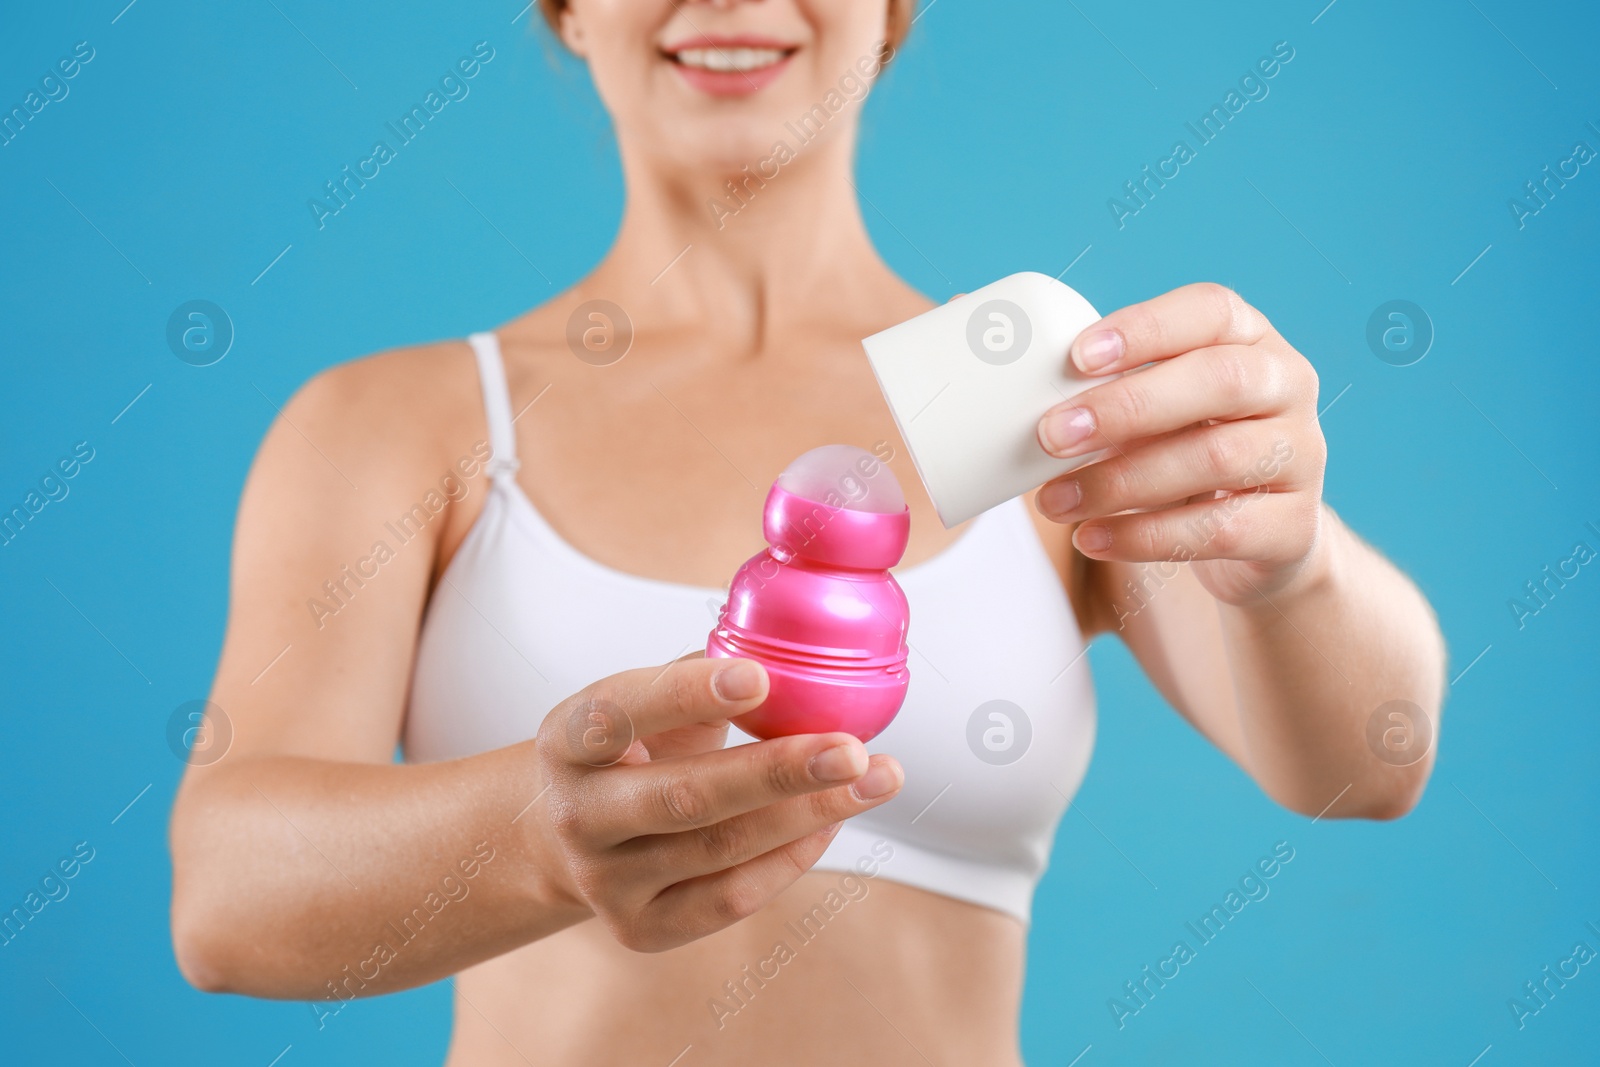 Photo of Young woman holding deodorant on teal background, closeup